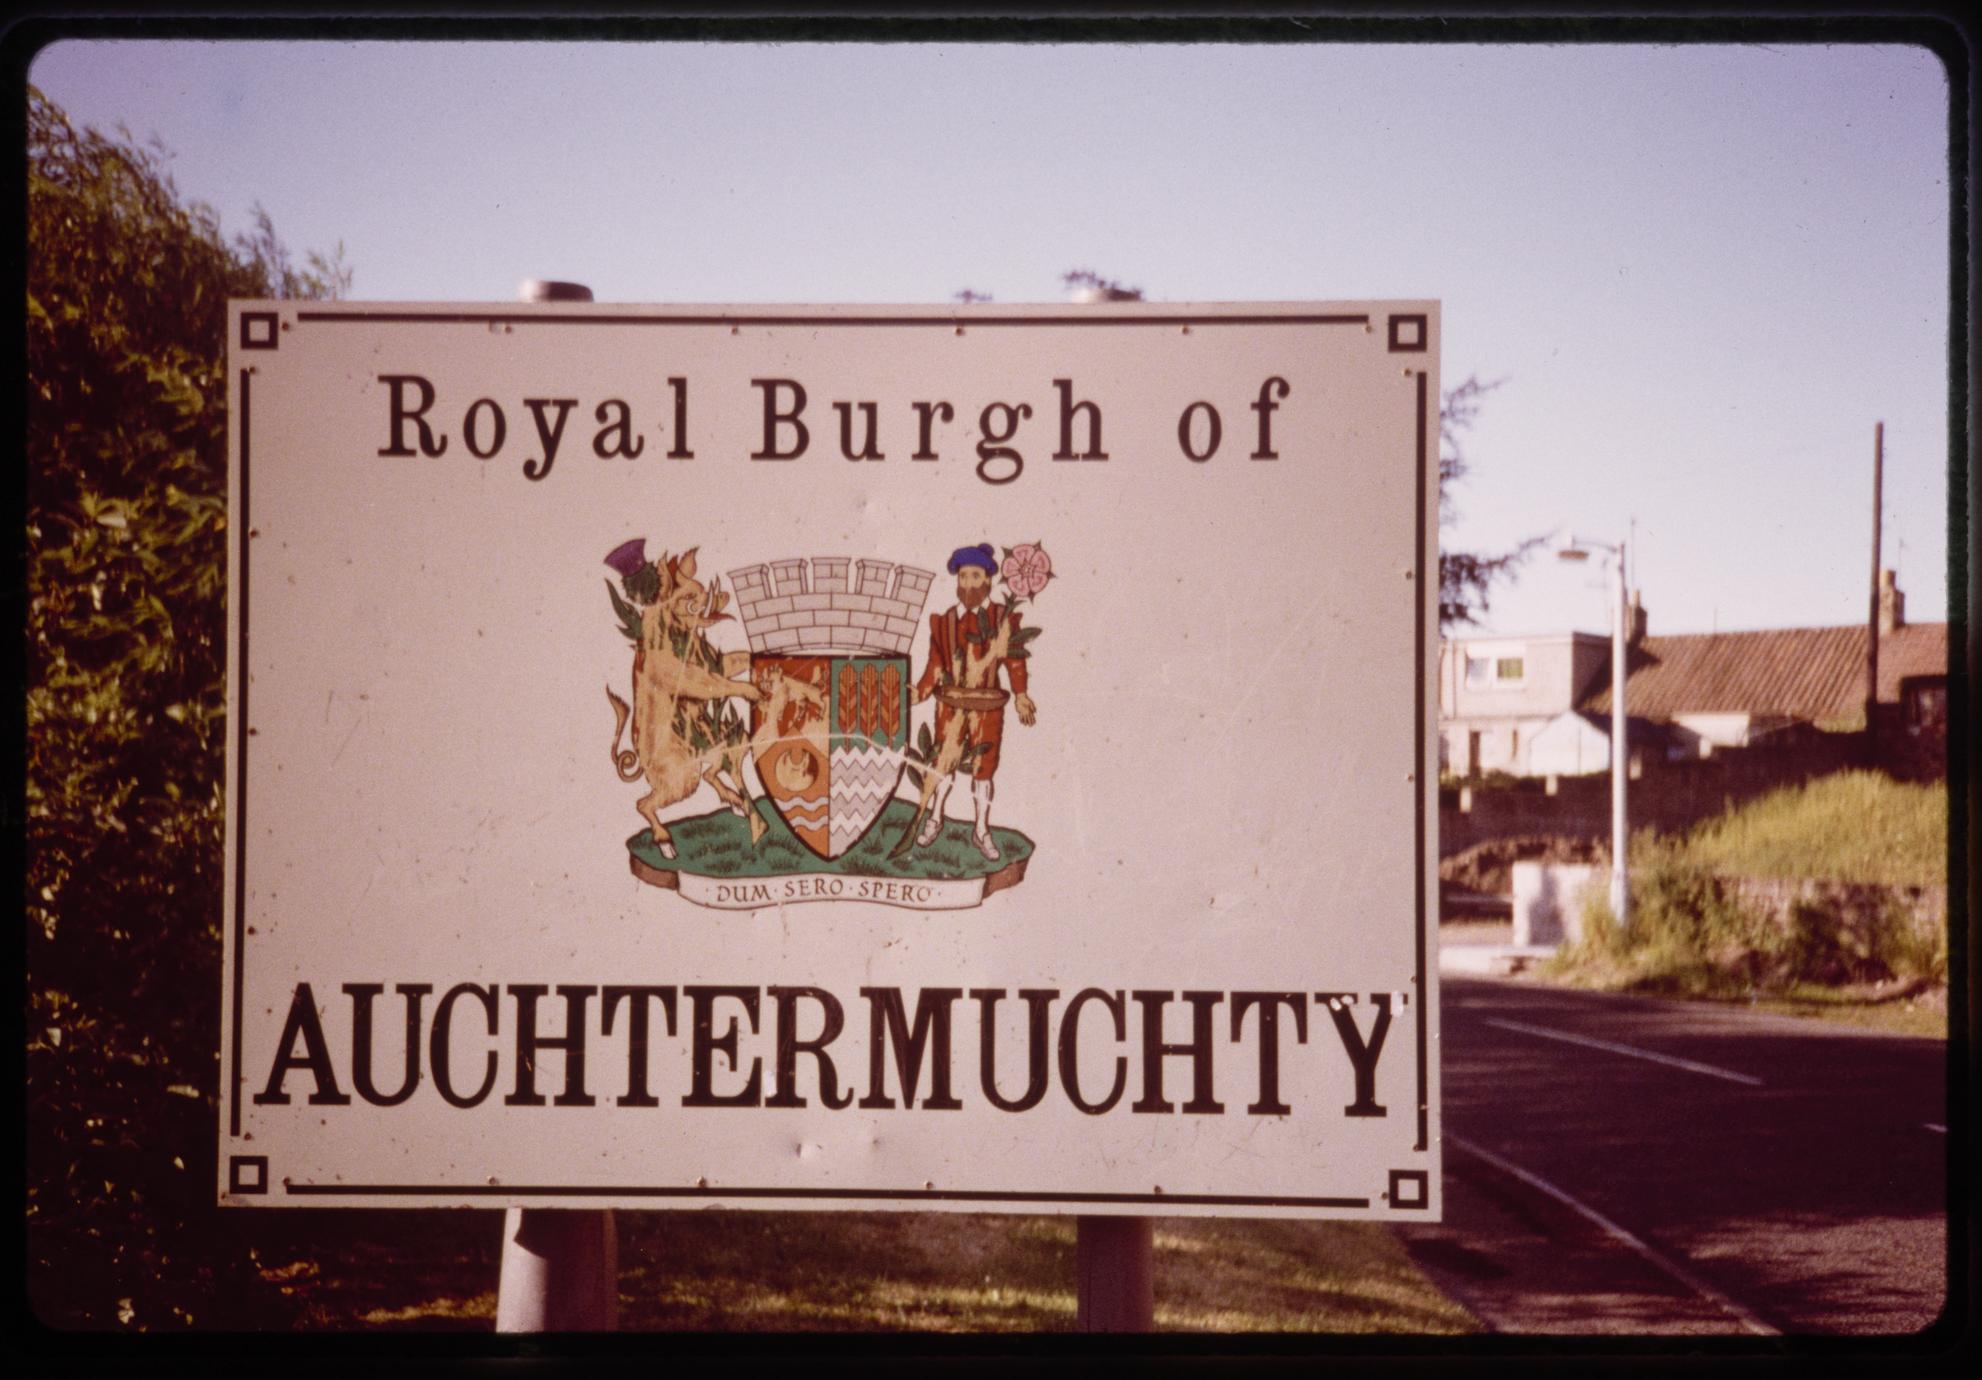 Royal Burgh of Auchtermuchty civic sign